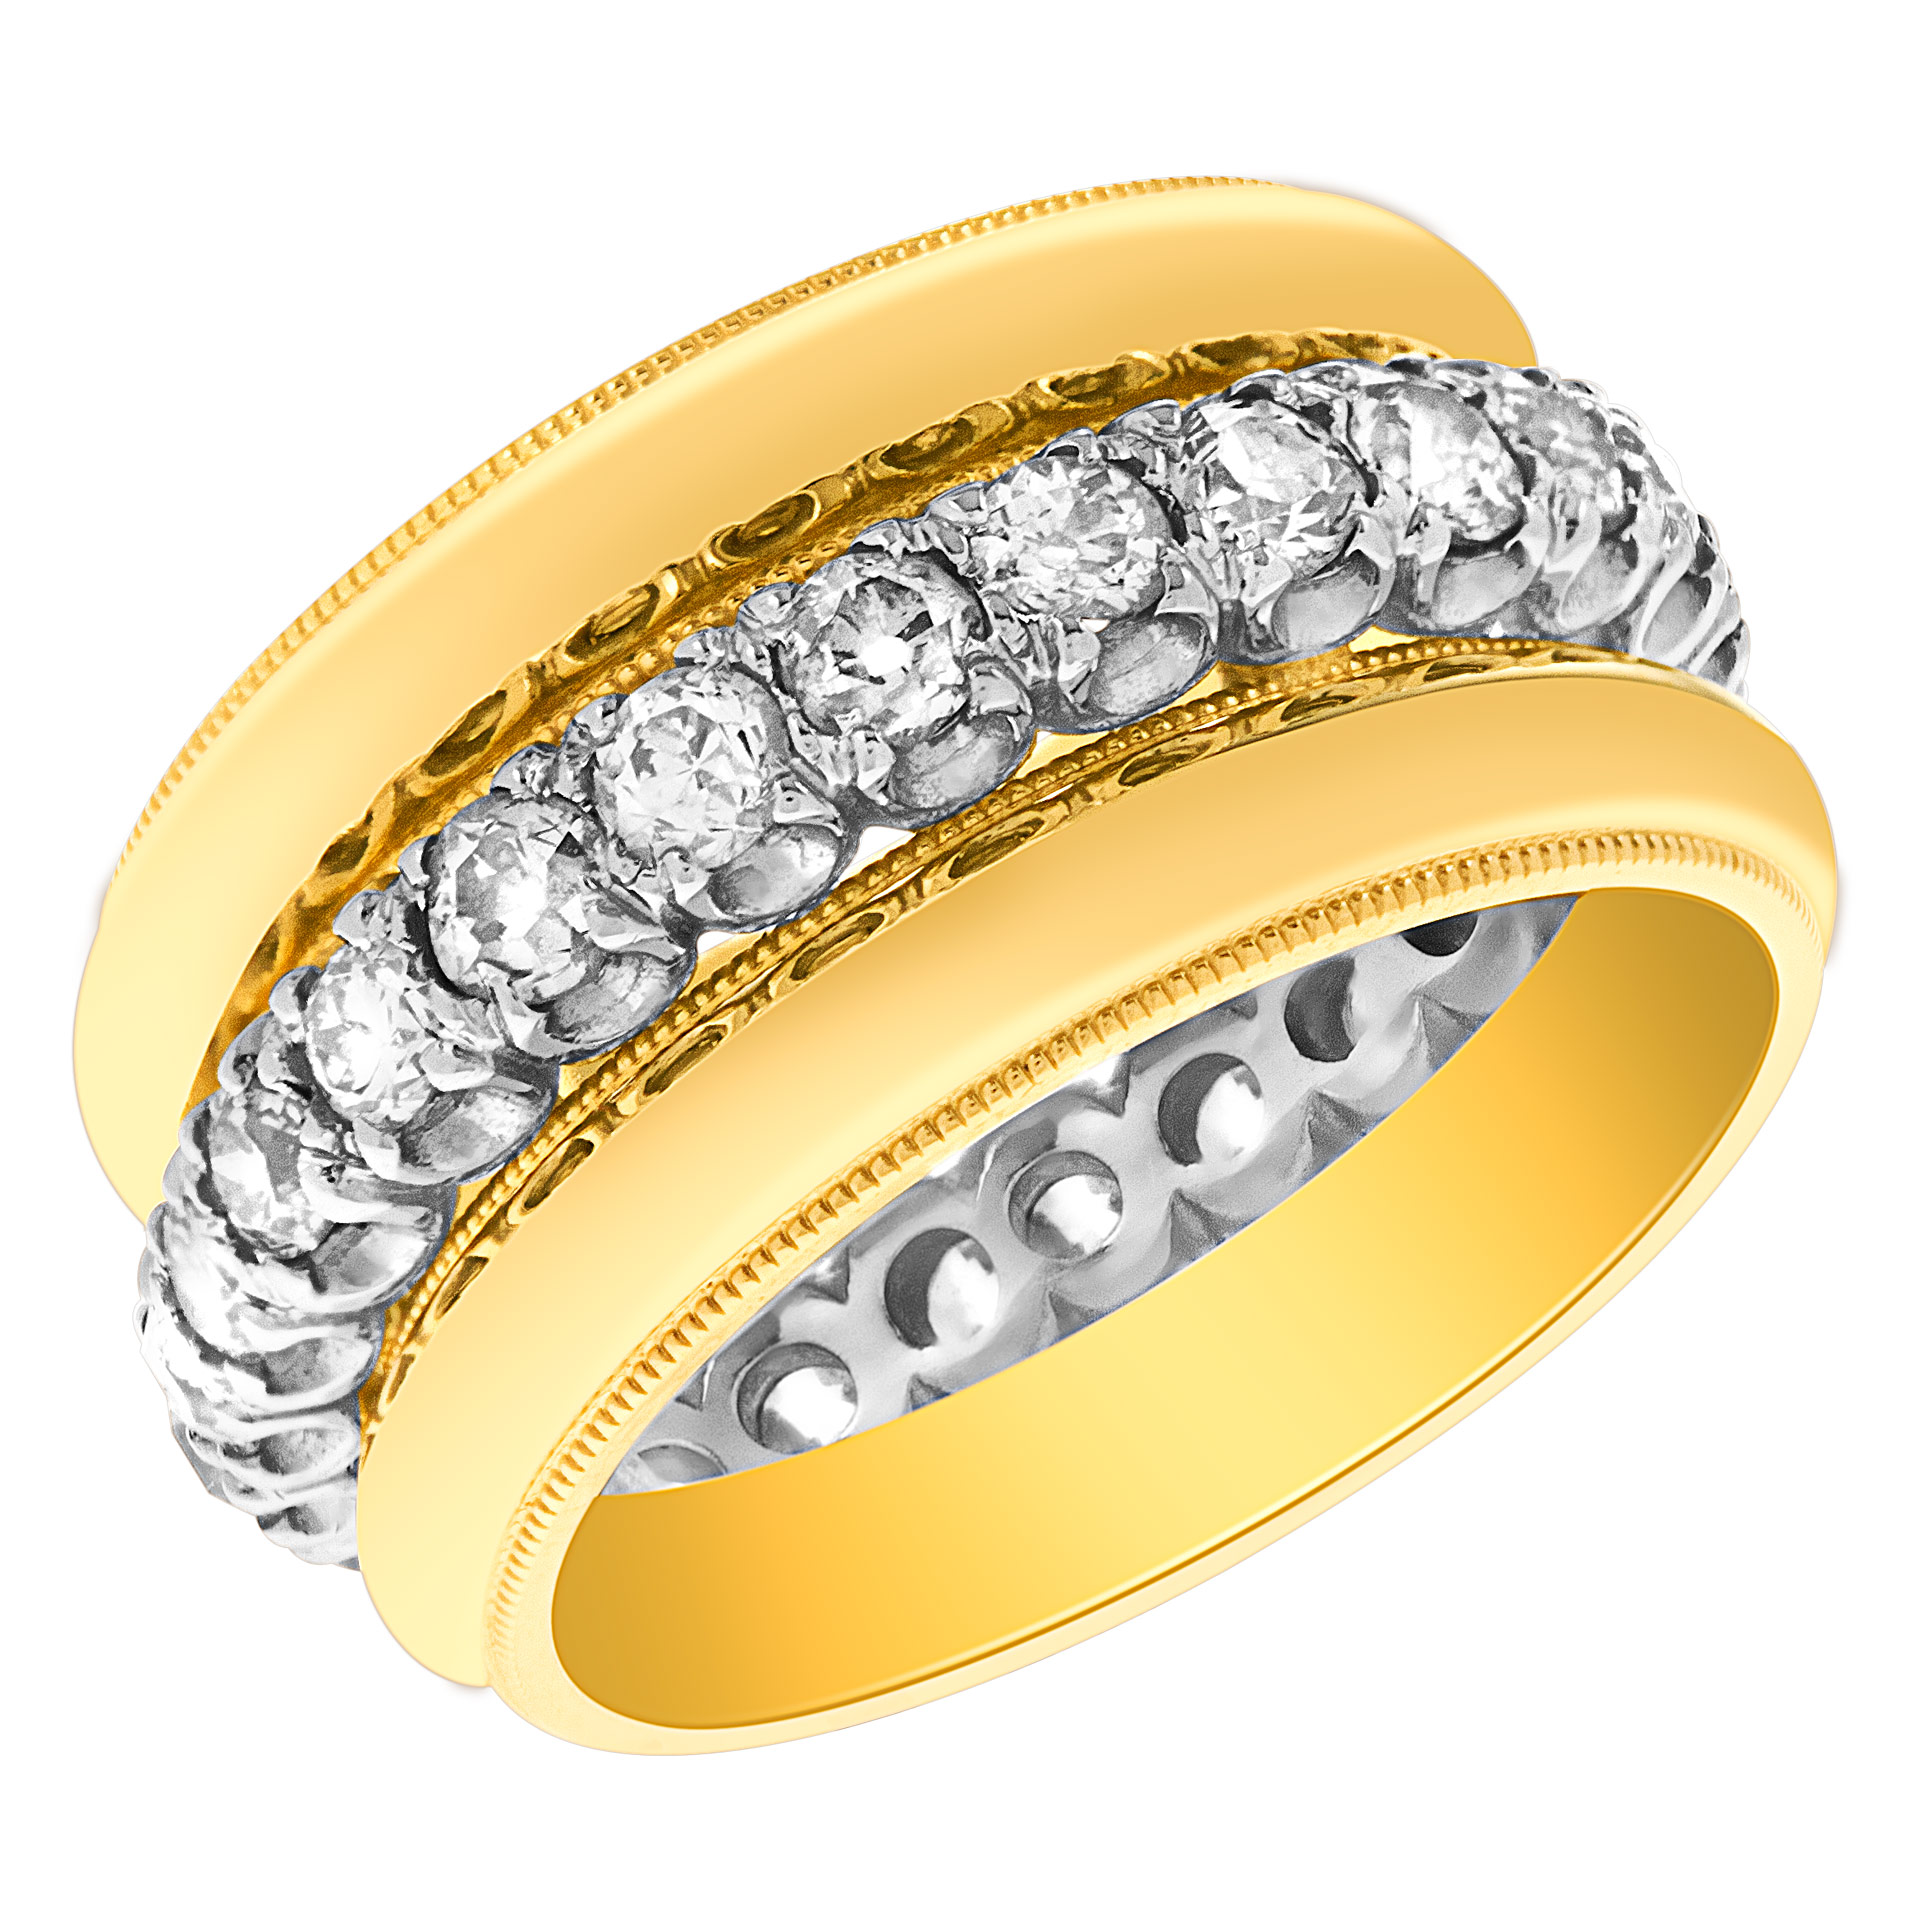 Wide high-class band in 14k yellow gold. 2 carats in diamonds. Size 7. image 2